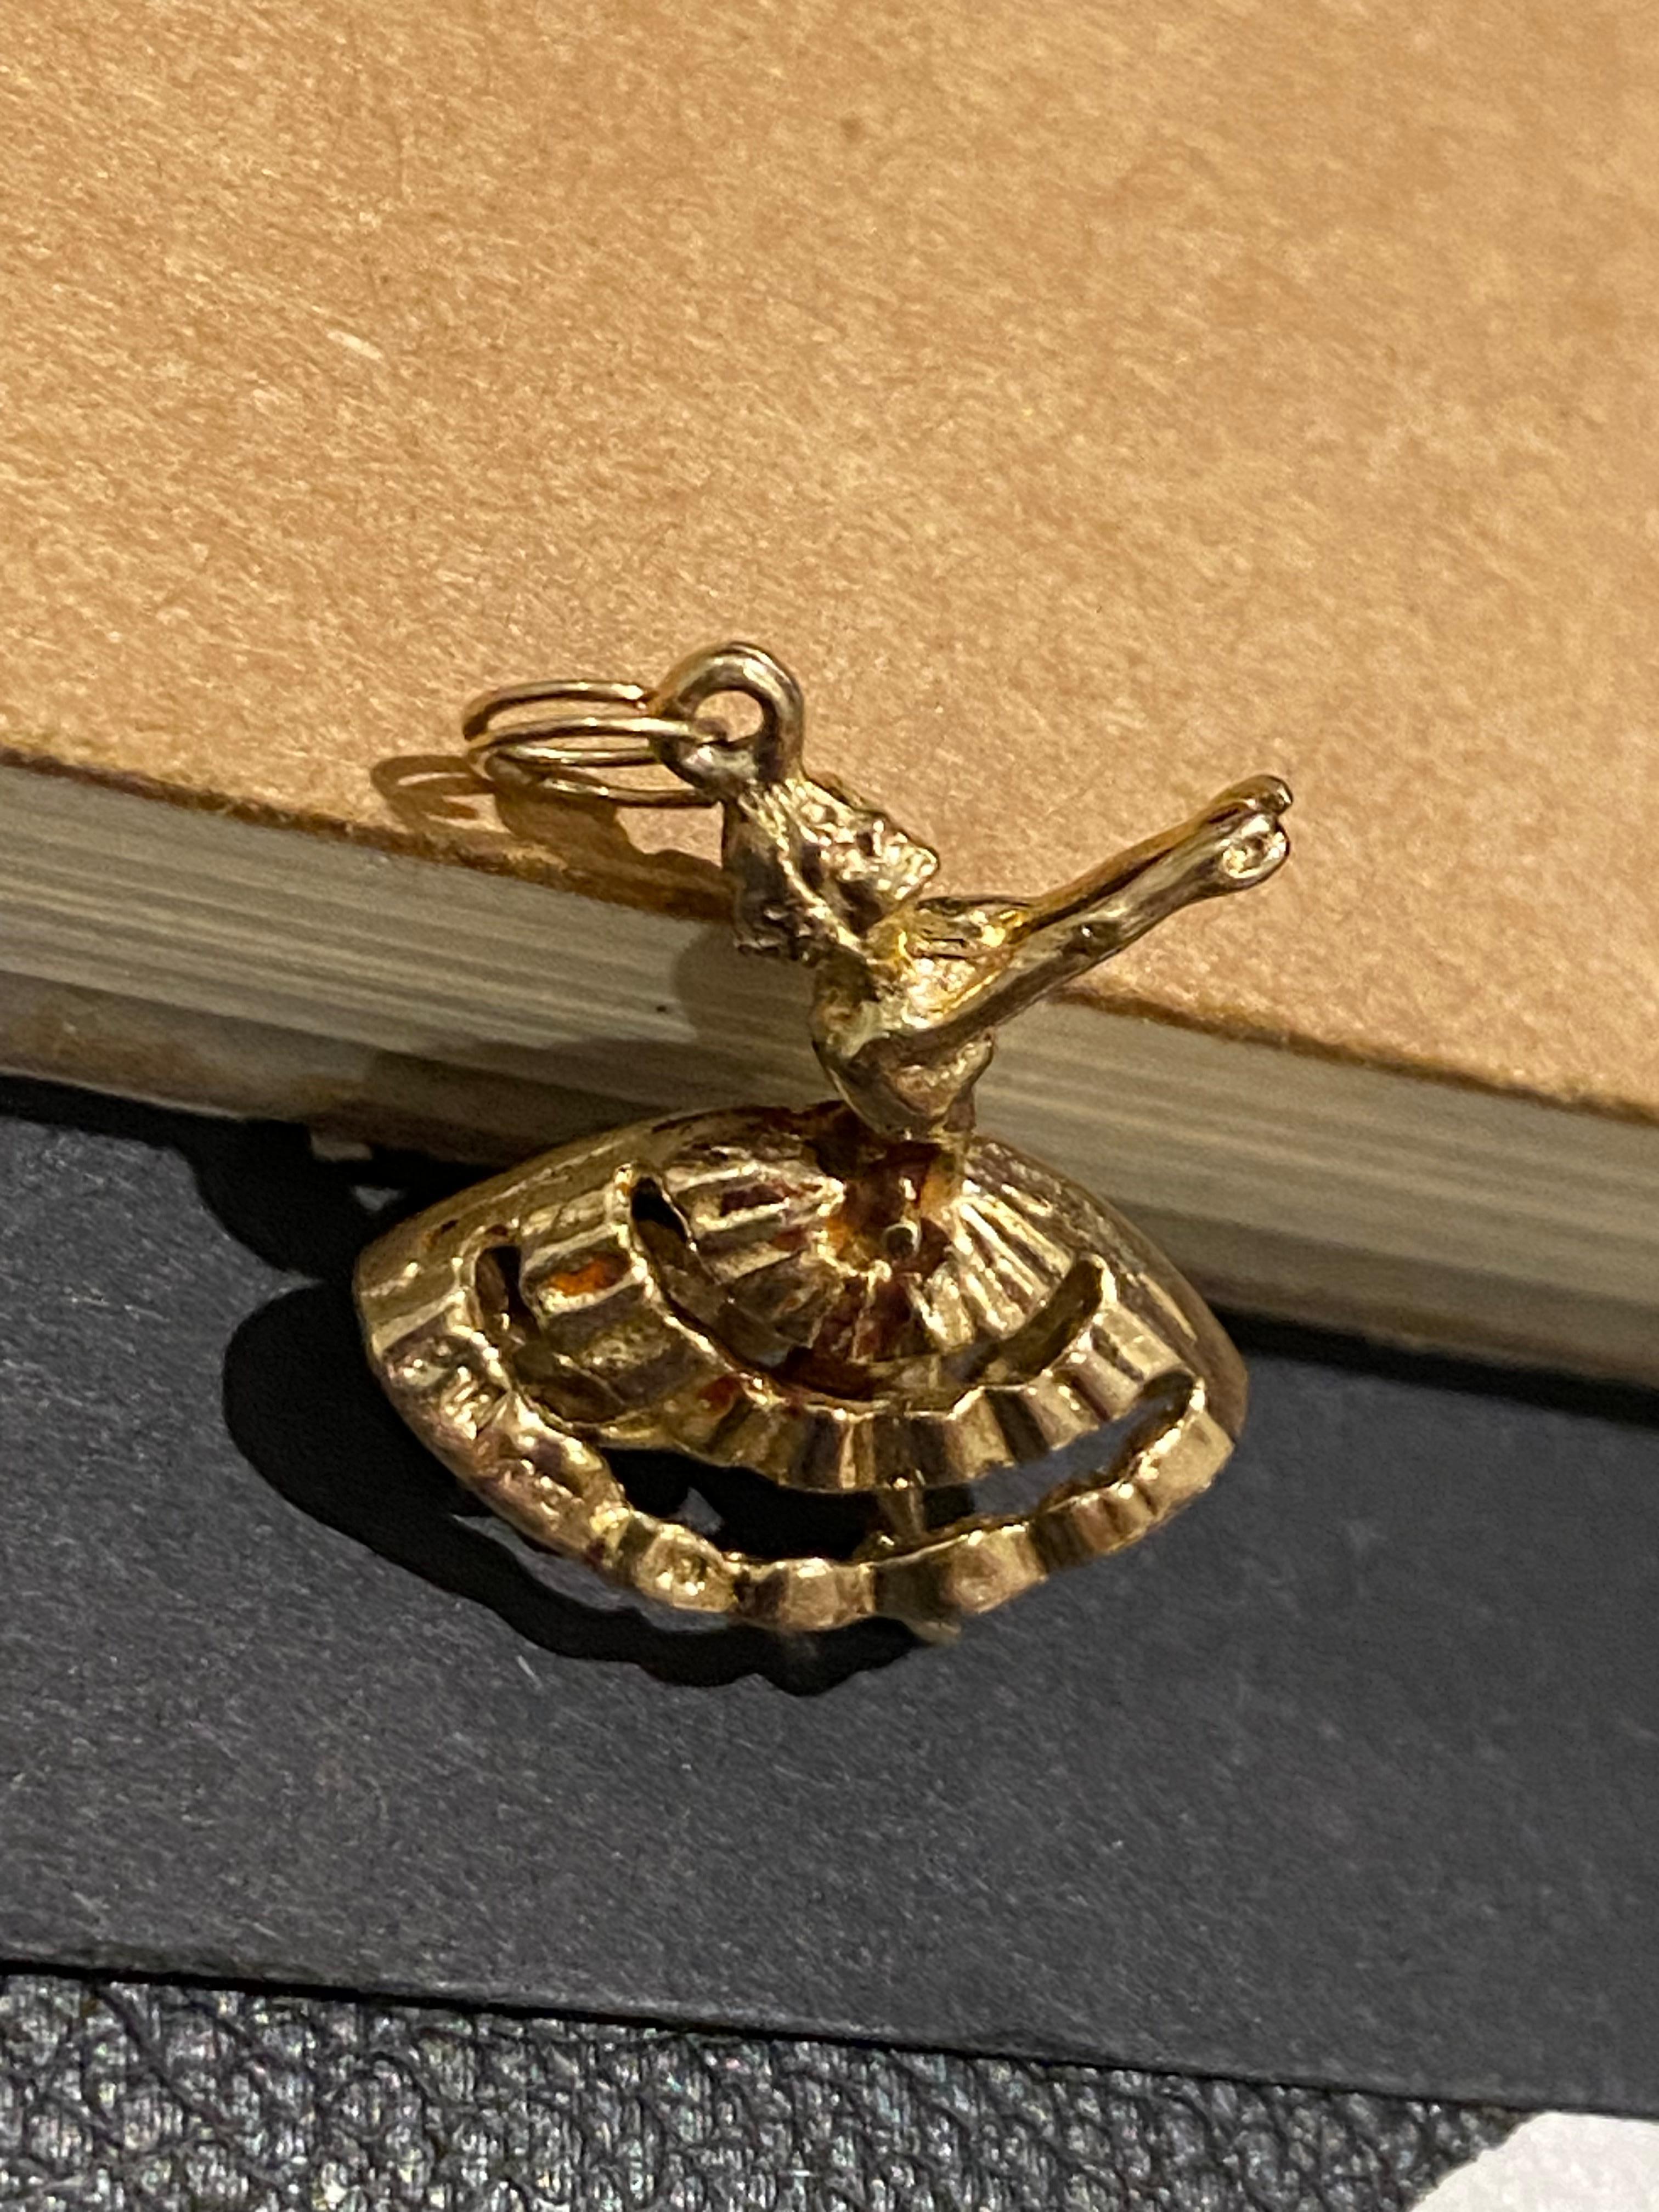 Superb 9K Yellow Gold Dancer / Ballerina with Moving Legs Charm. England, c1961. For Sale 1